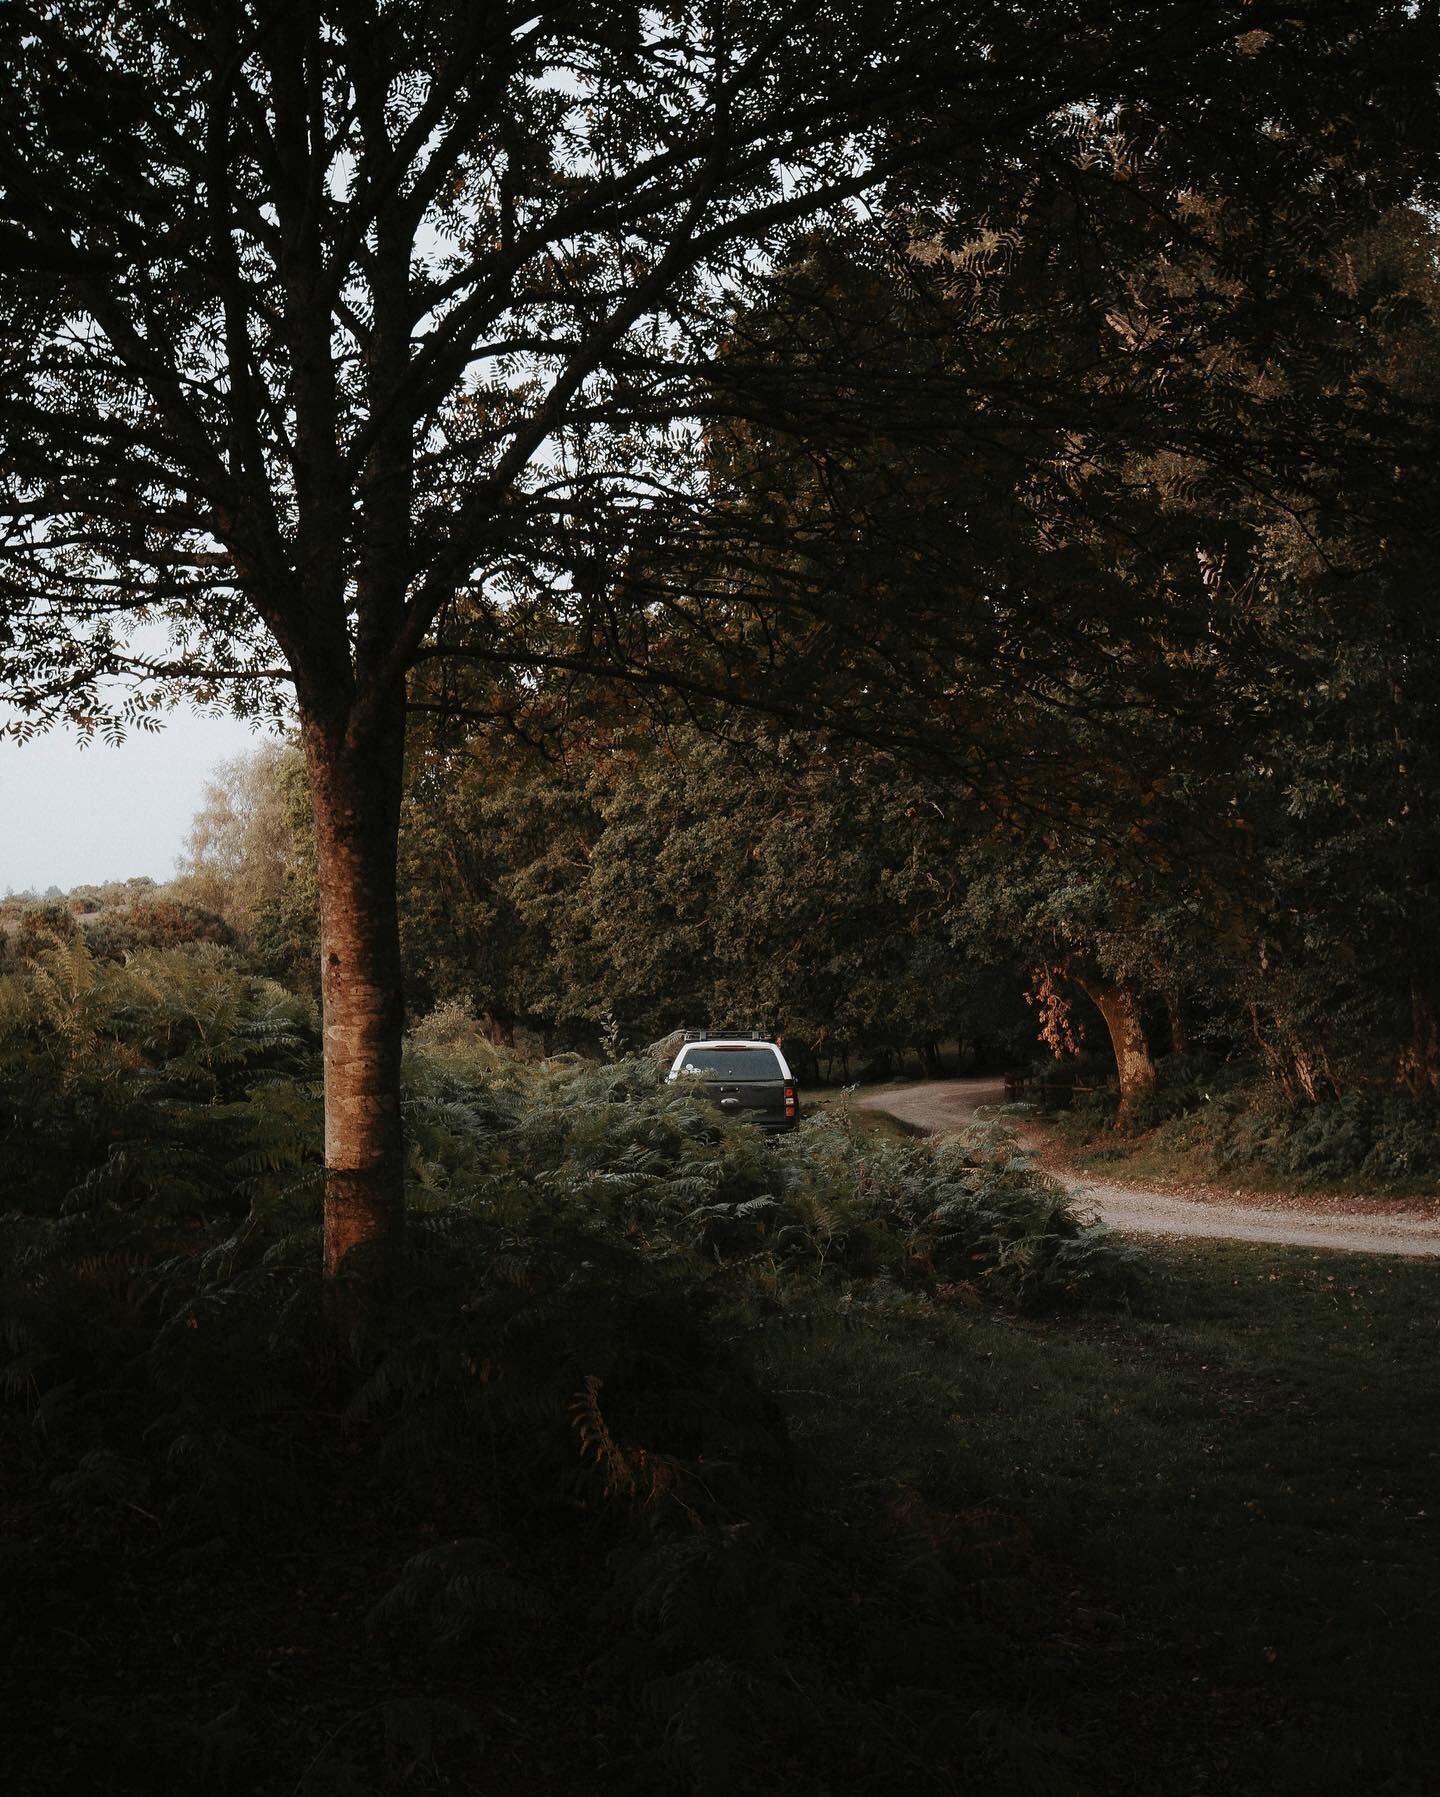 Tucked away deep in The New Forest yesterday evening as I chased a dramatic sunset with the toys 🌅